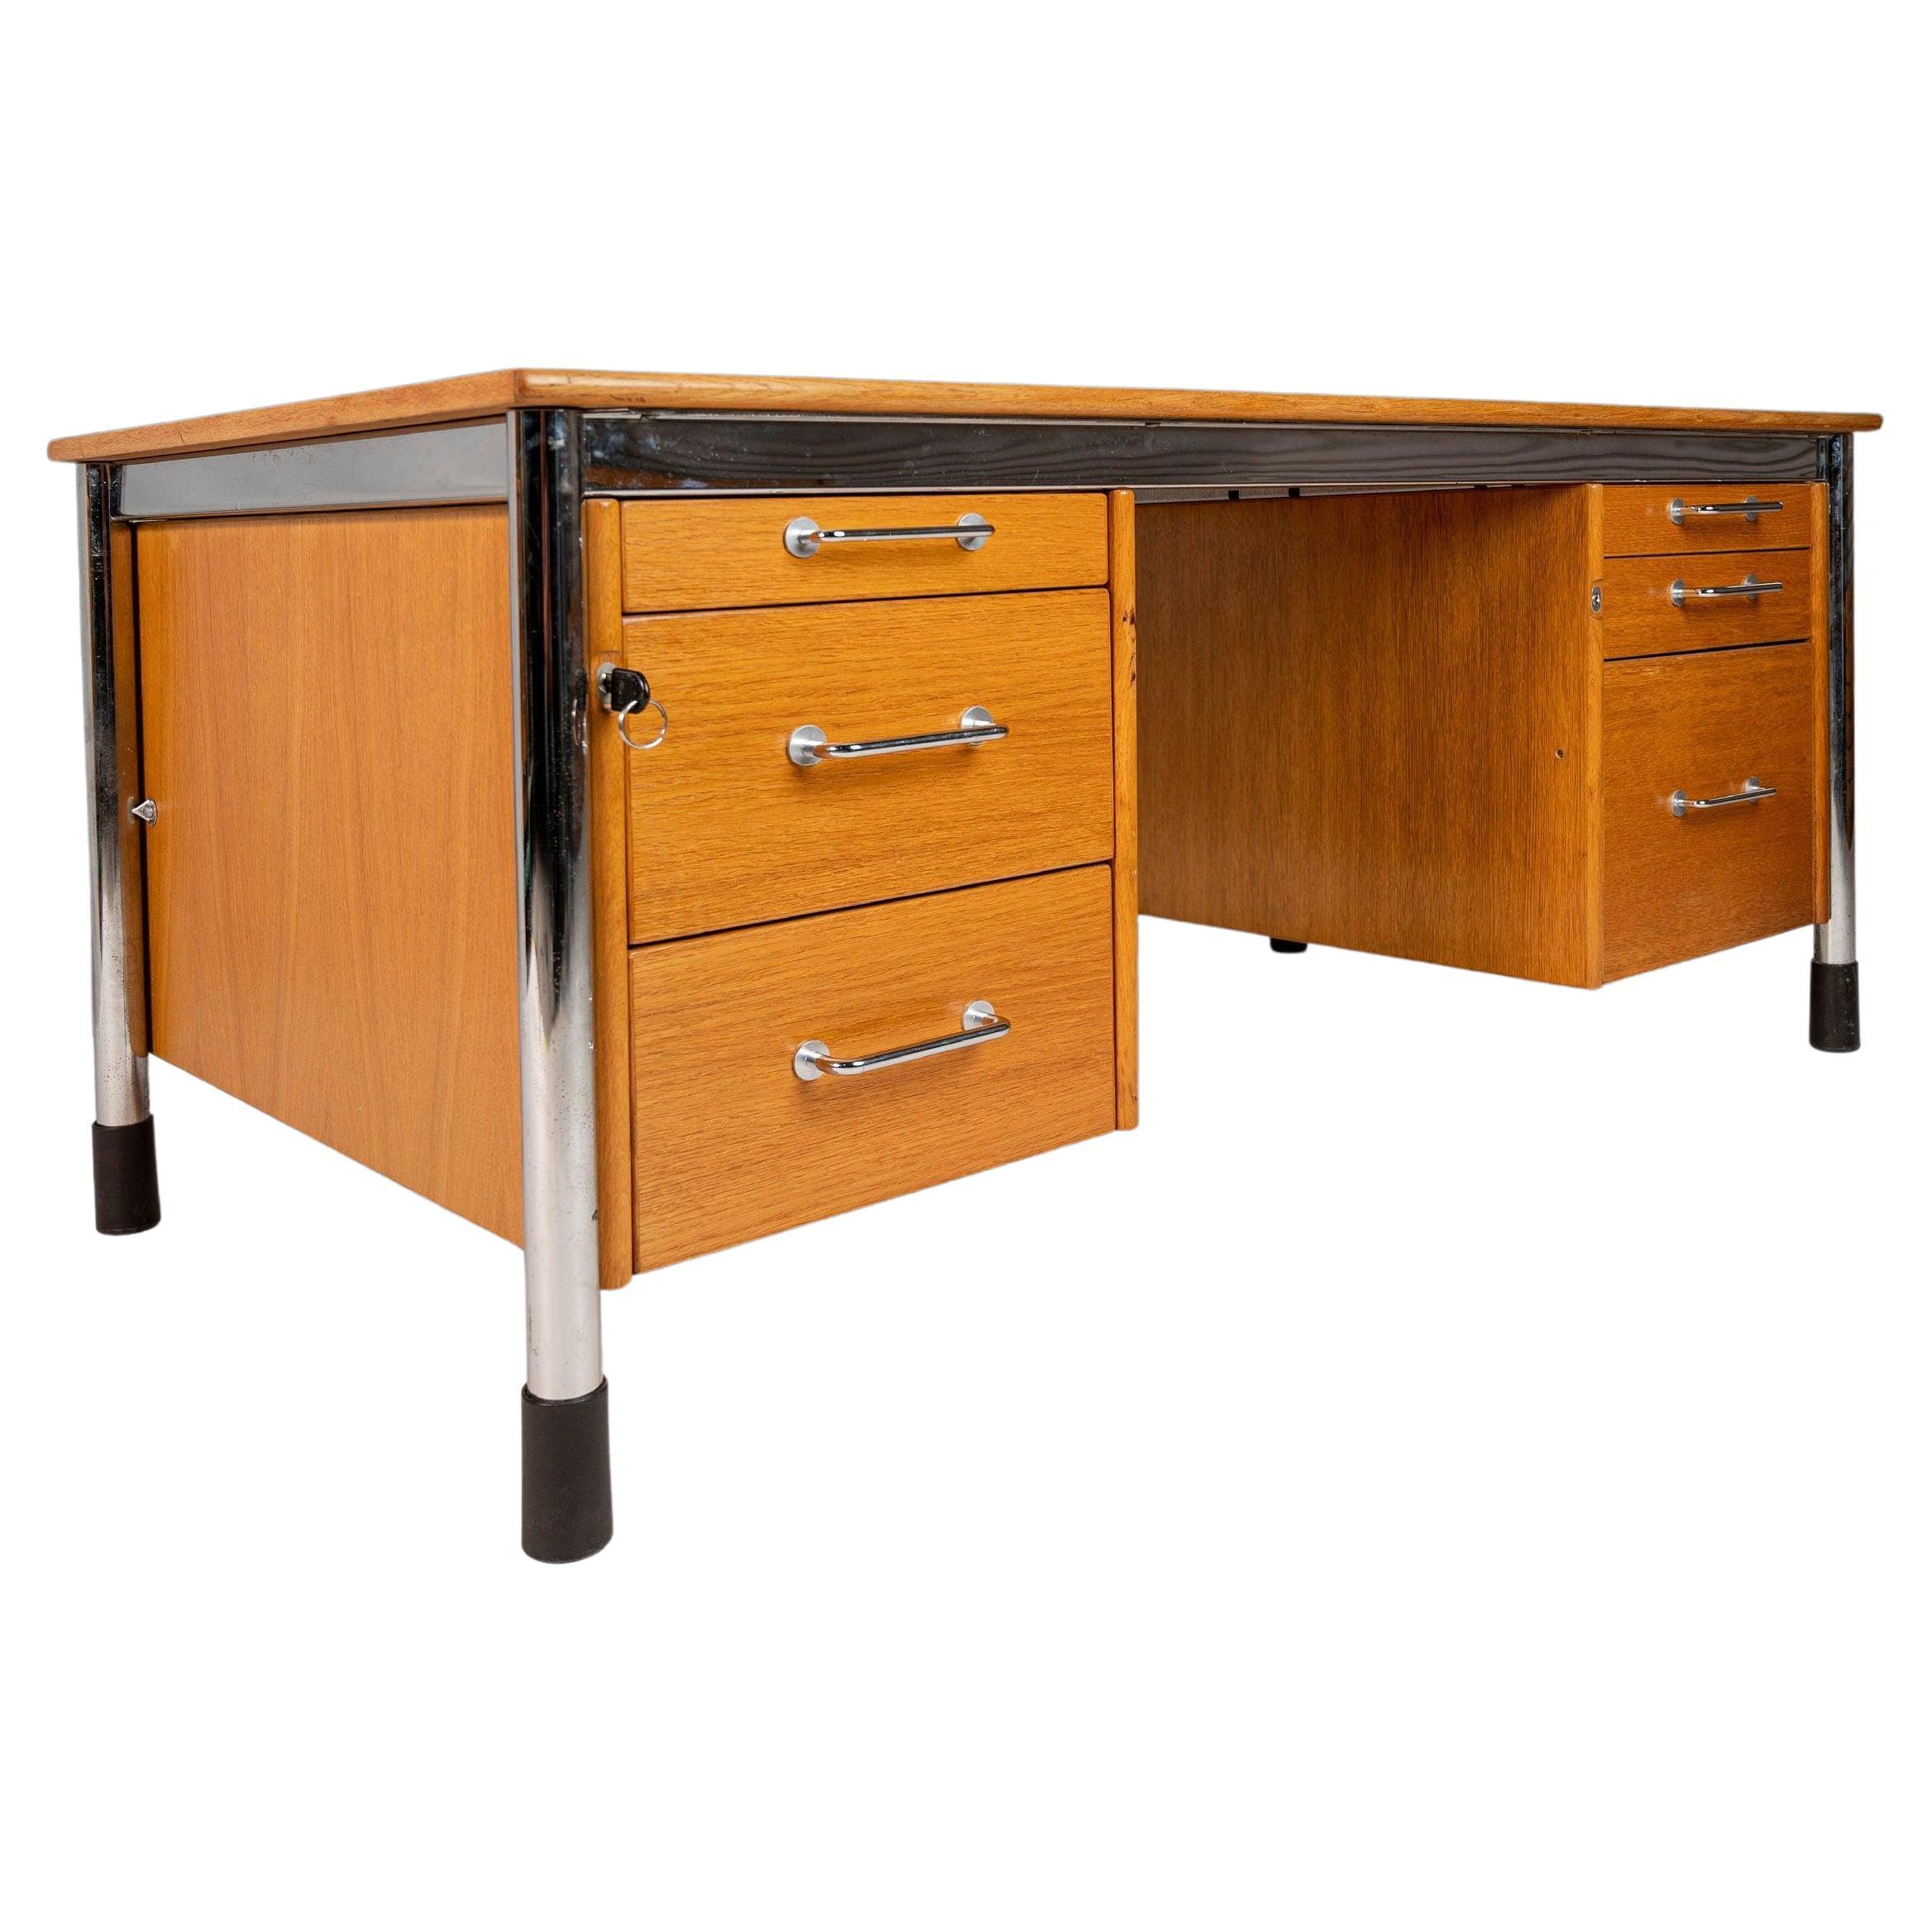 Signatur Executive Desk by Tord Bjorklund in Oak and Chrome, Sweden, c. 1980 For Sale